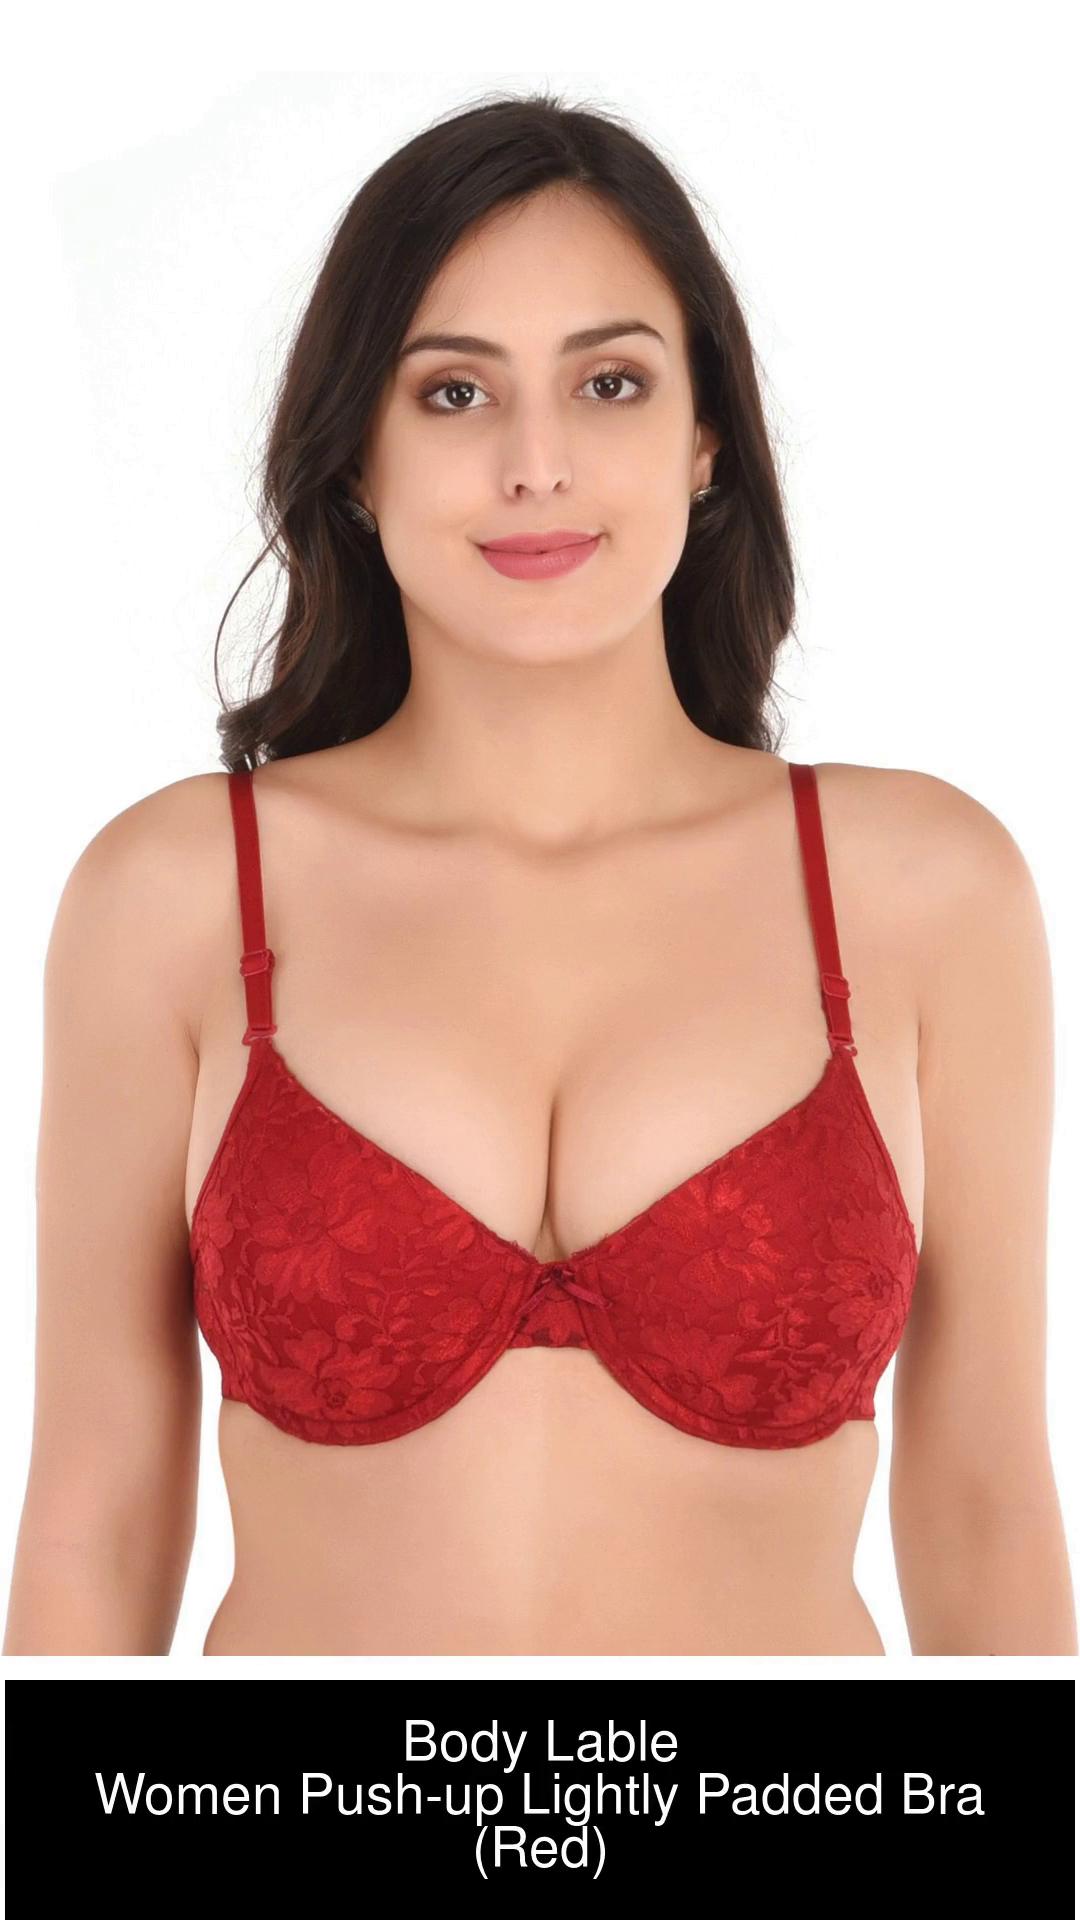 Body Lable Women Push-up Lightly Padded Bra - Buy Body Lable Women Push-up  Lightly Padded Bra Online at Best Prices in India